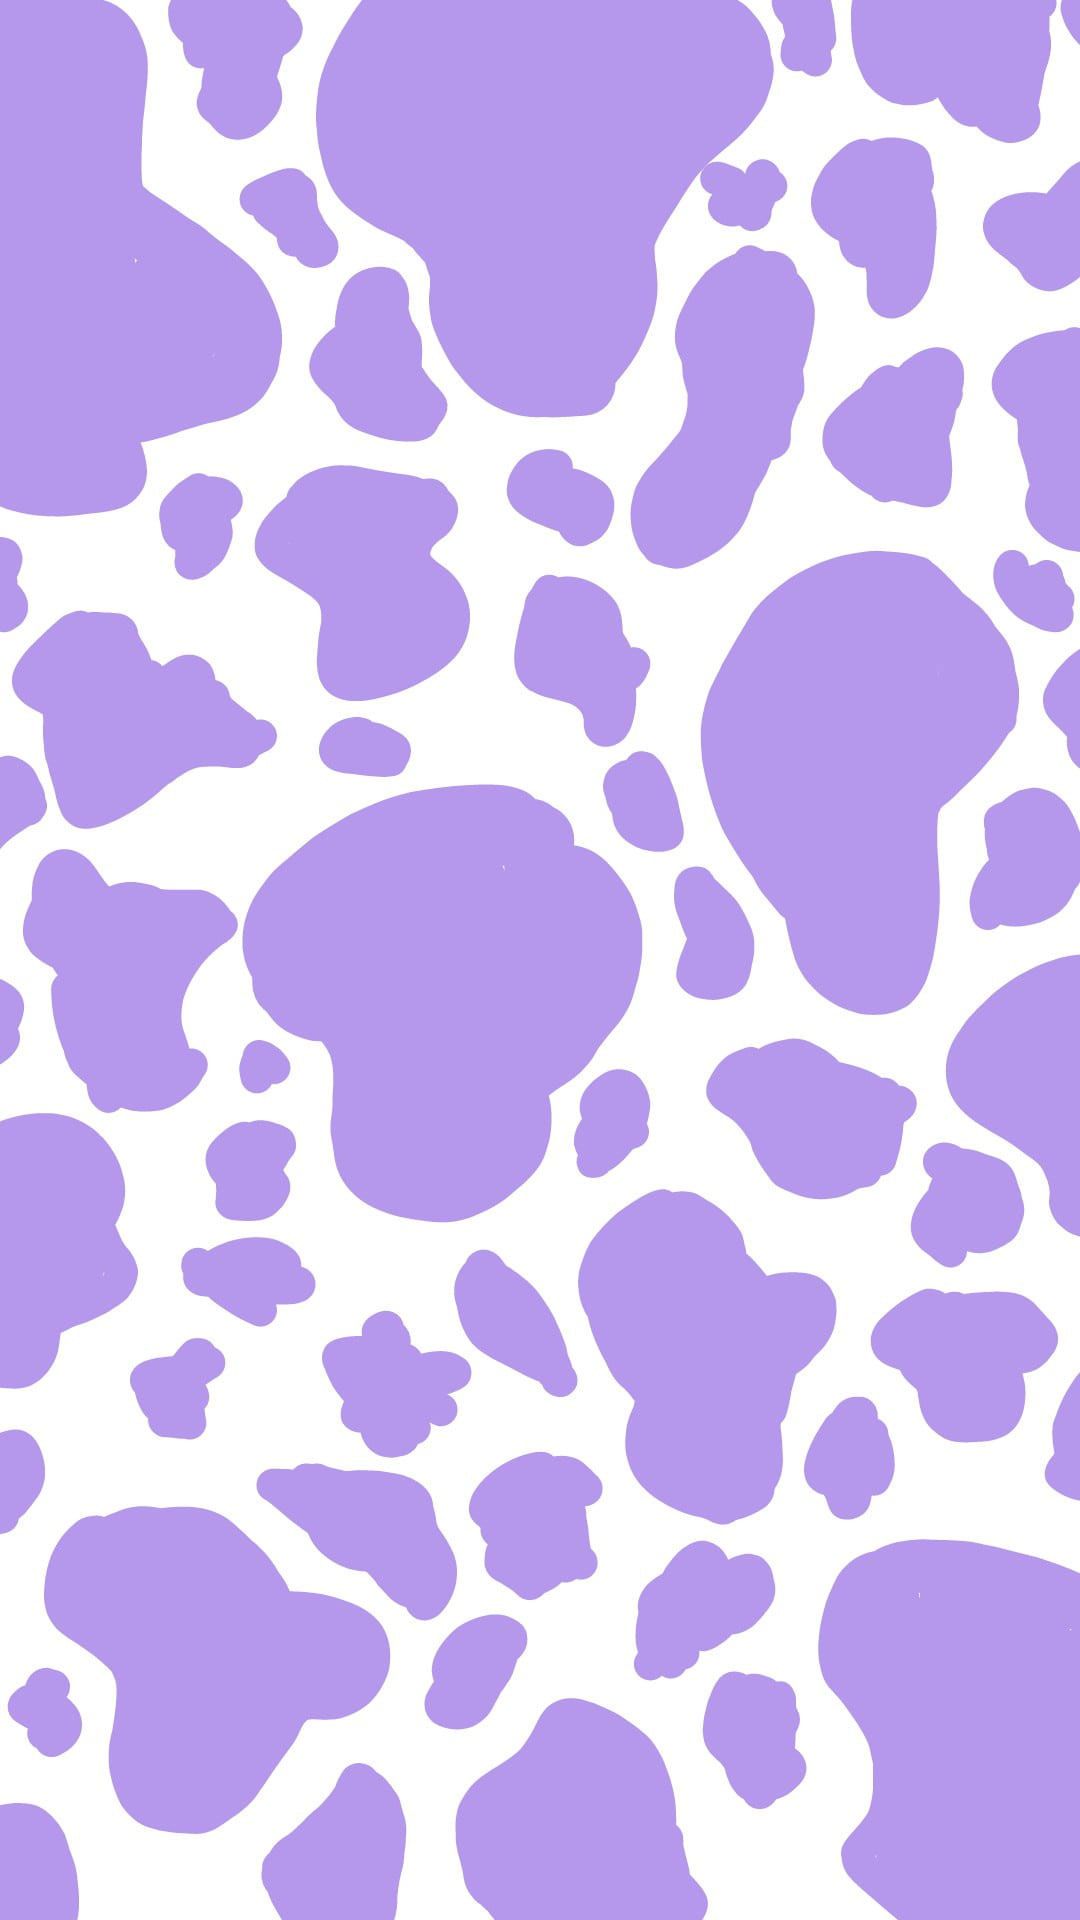 Aesthetic purple cow print background wallpaper for phone. - Purple, simple, cow, violet, pattern